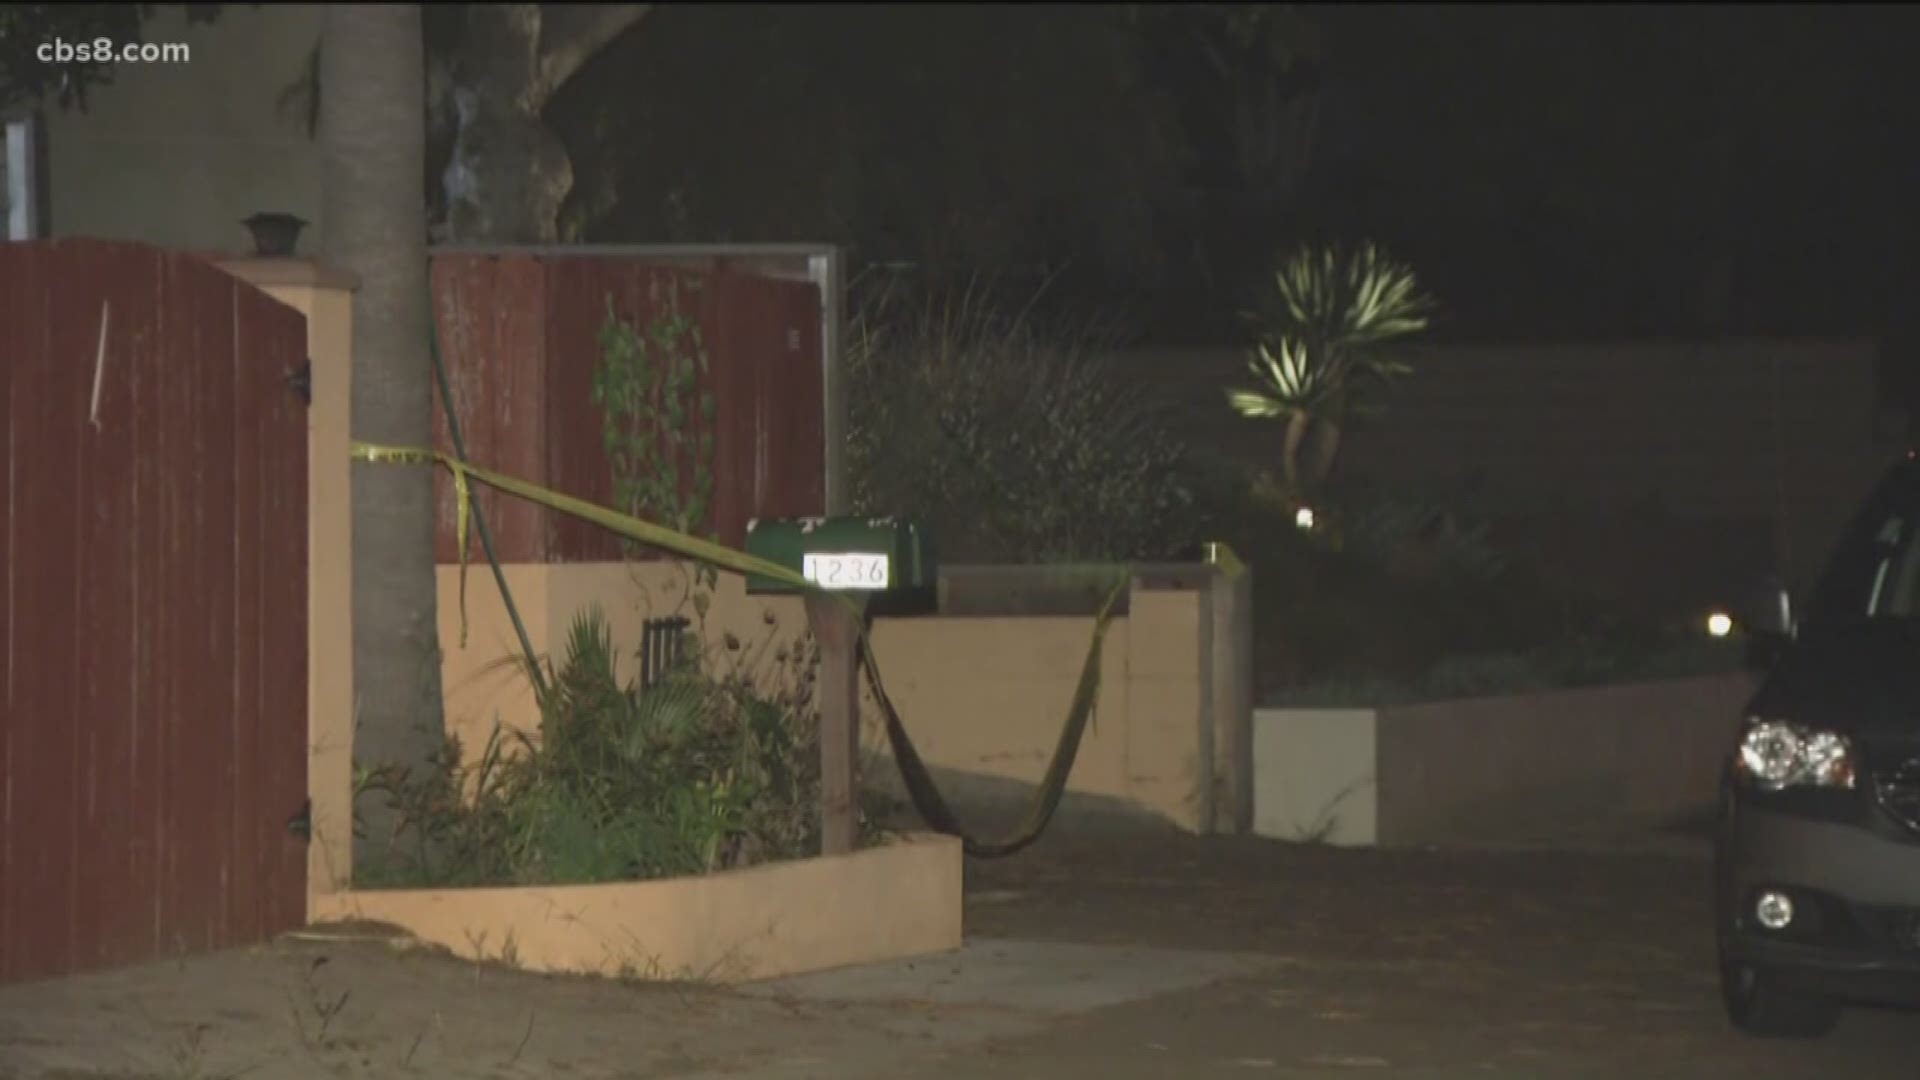 Neighbors called San Diego County Sheriff's to report a foul odor coming from the residence.